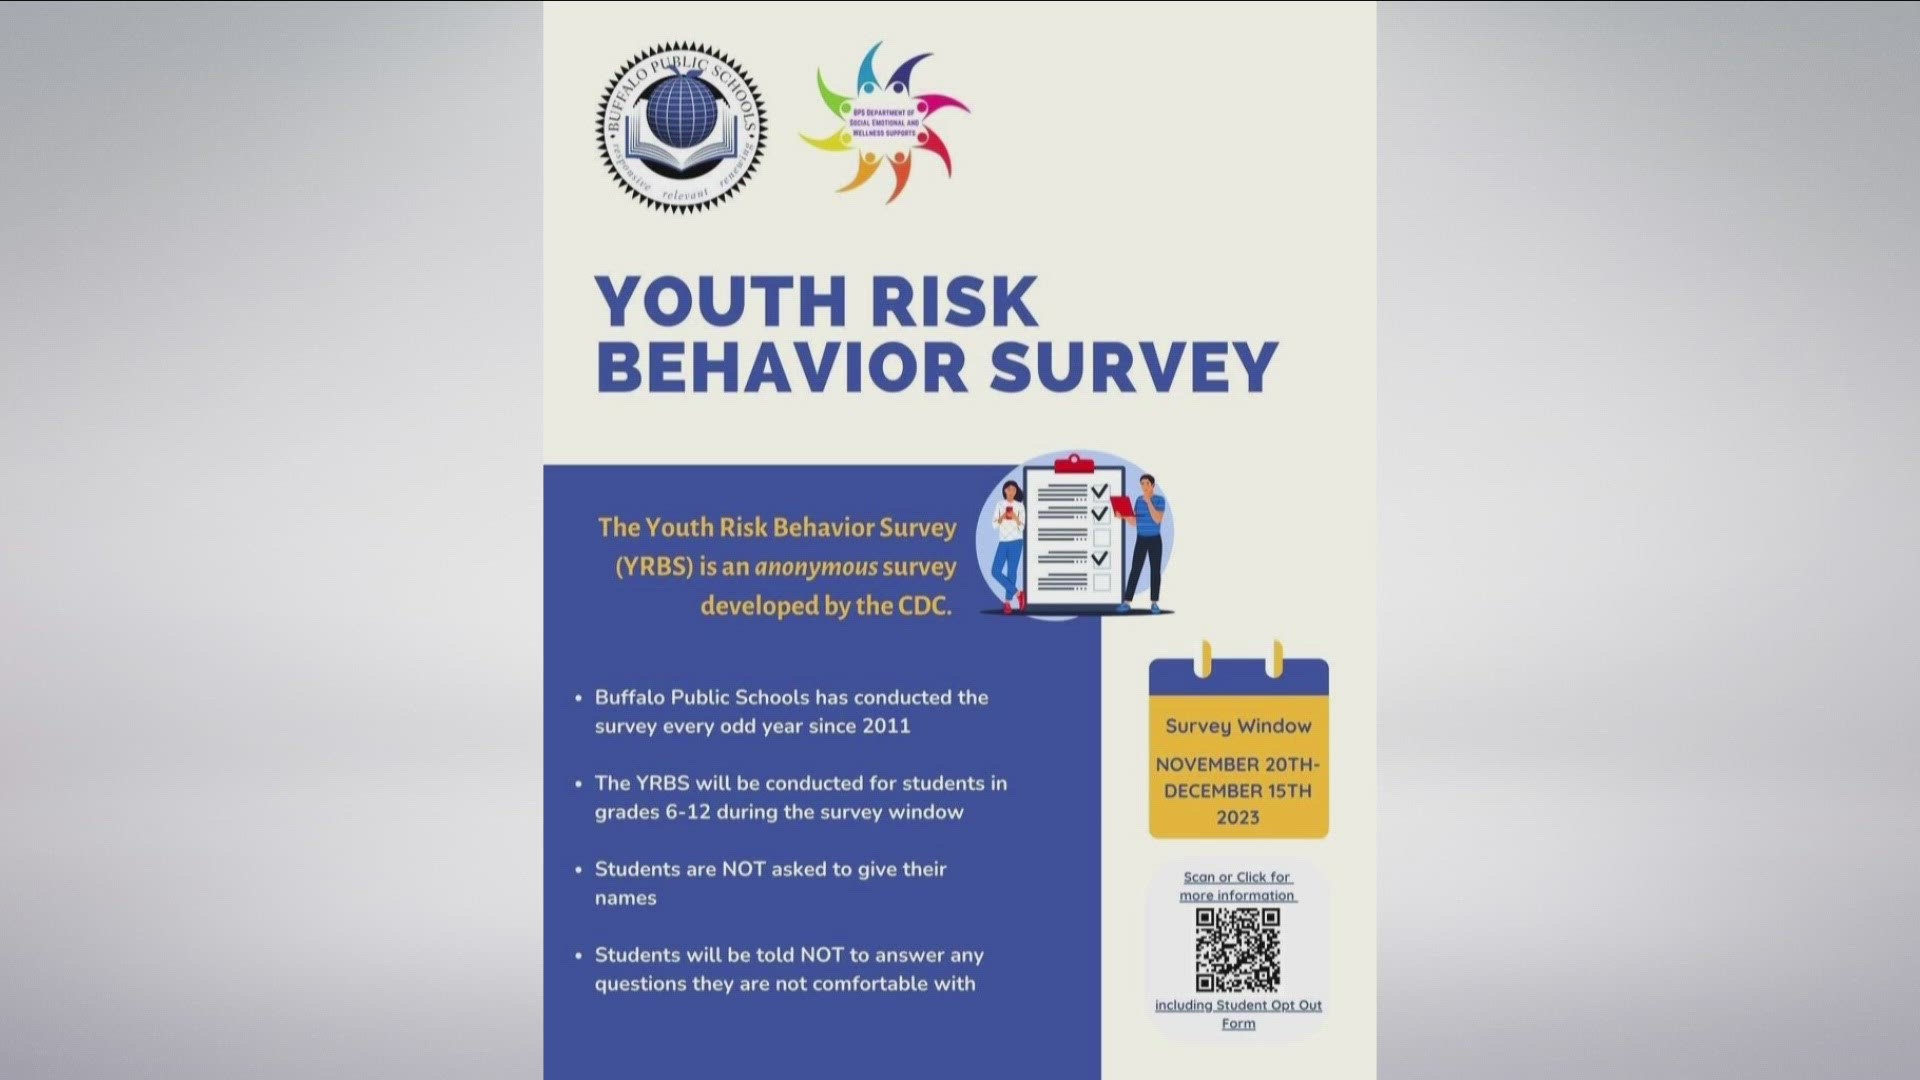 Youth behavior survey for BPS to make health improvements.